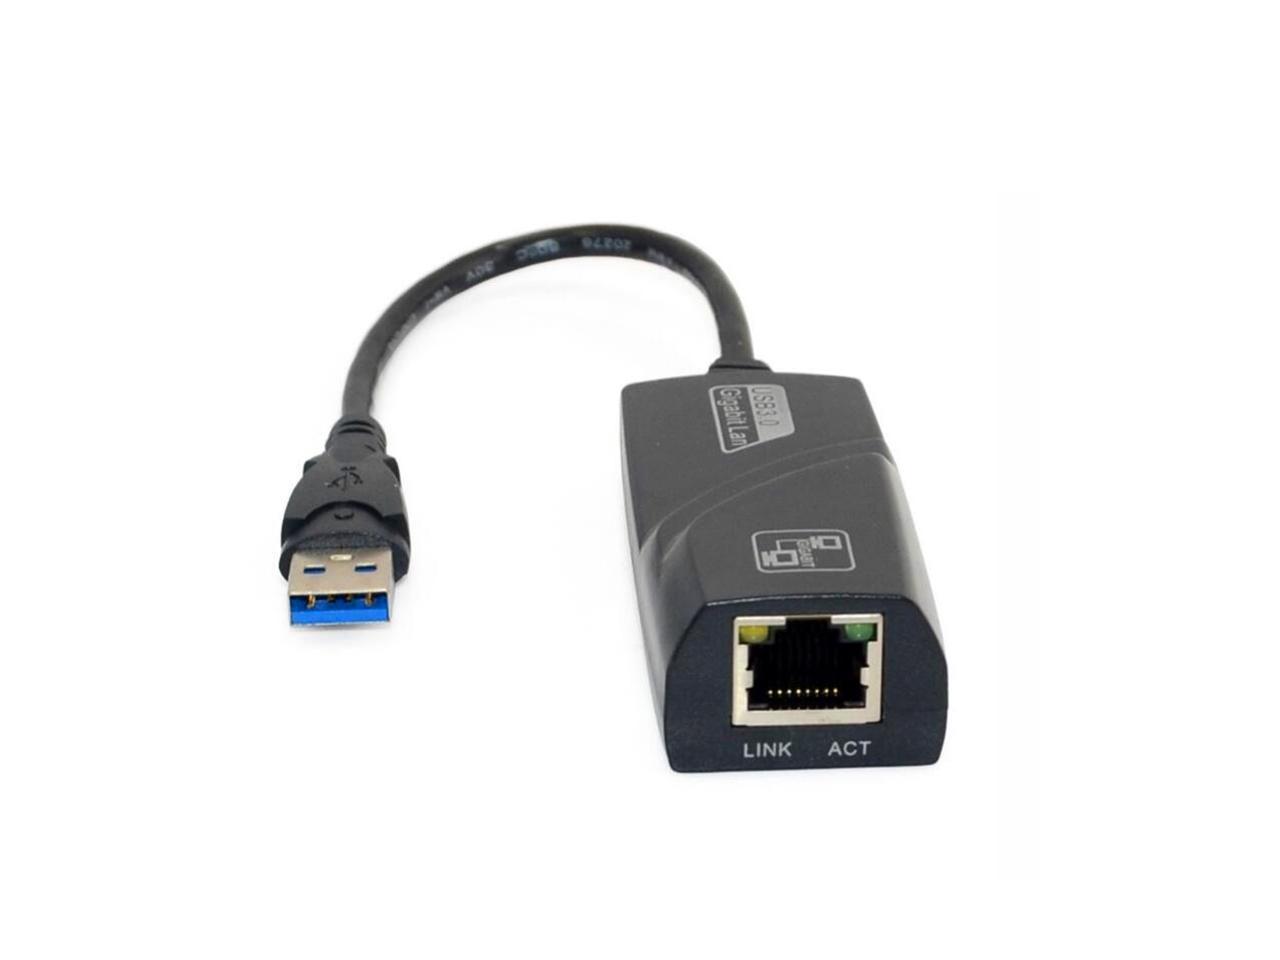 Hannord USB 3.0 to Ethernet Adapter, Driver Free 10/100/1000 Mbps Network RJ45 LAN Wired Gigabit Adapter 8.1, 7, XP, Linux, Mac OS, Chrome OS - Newegg.com